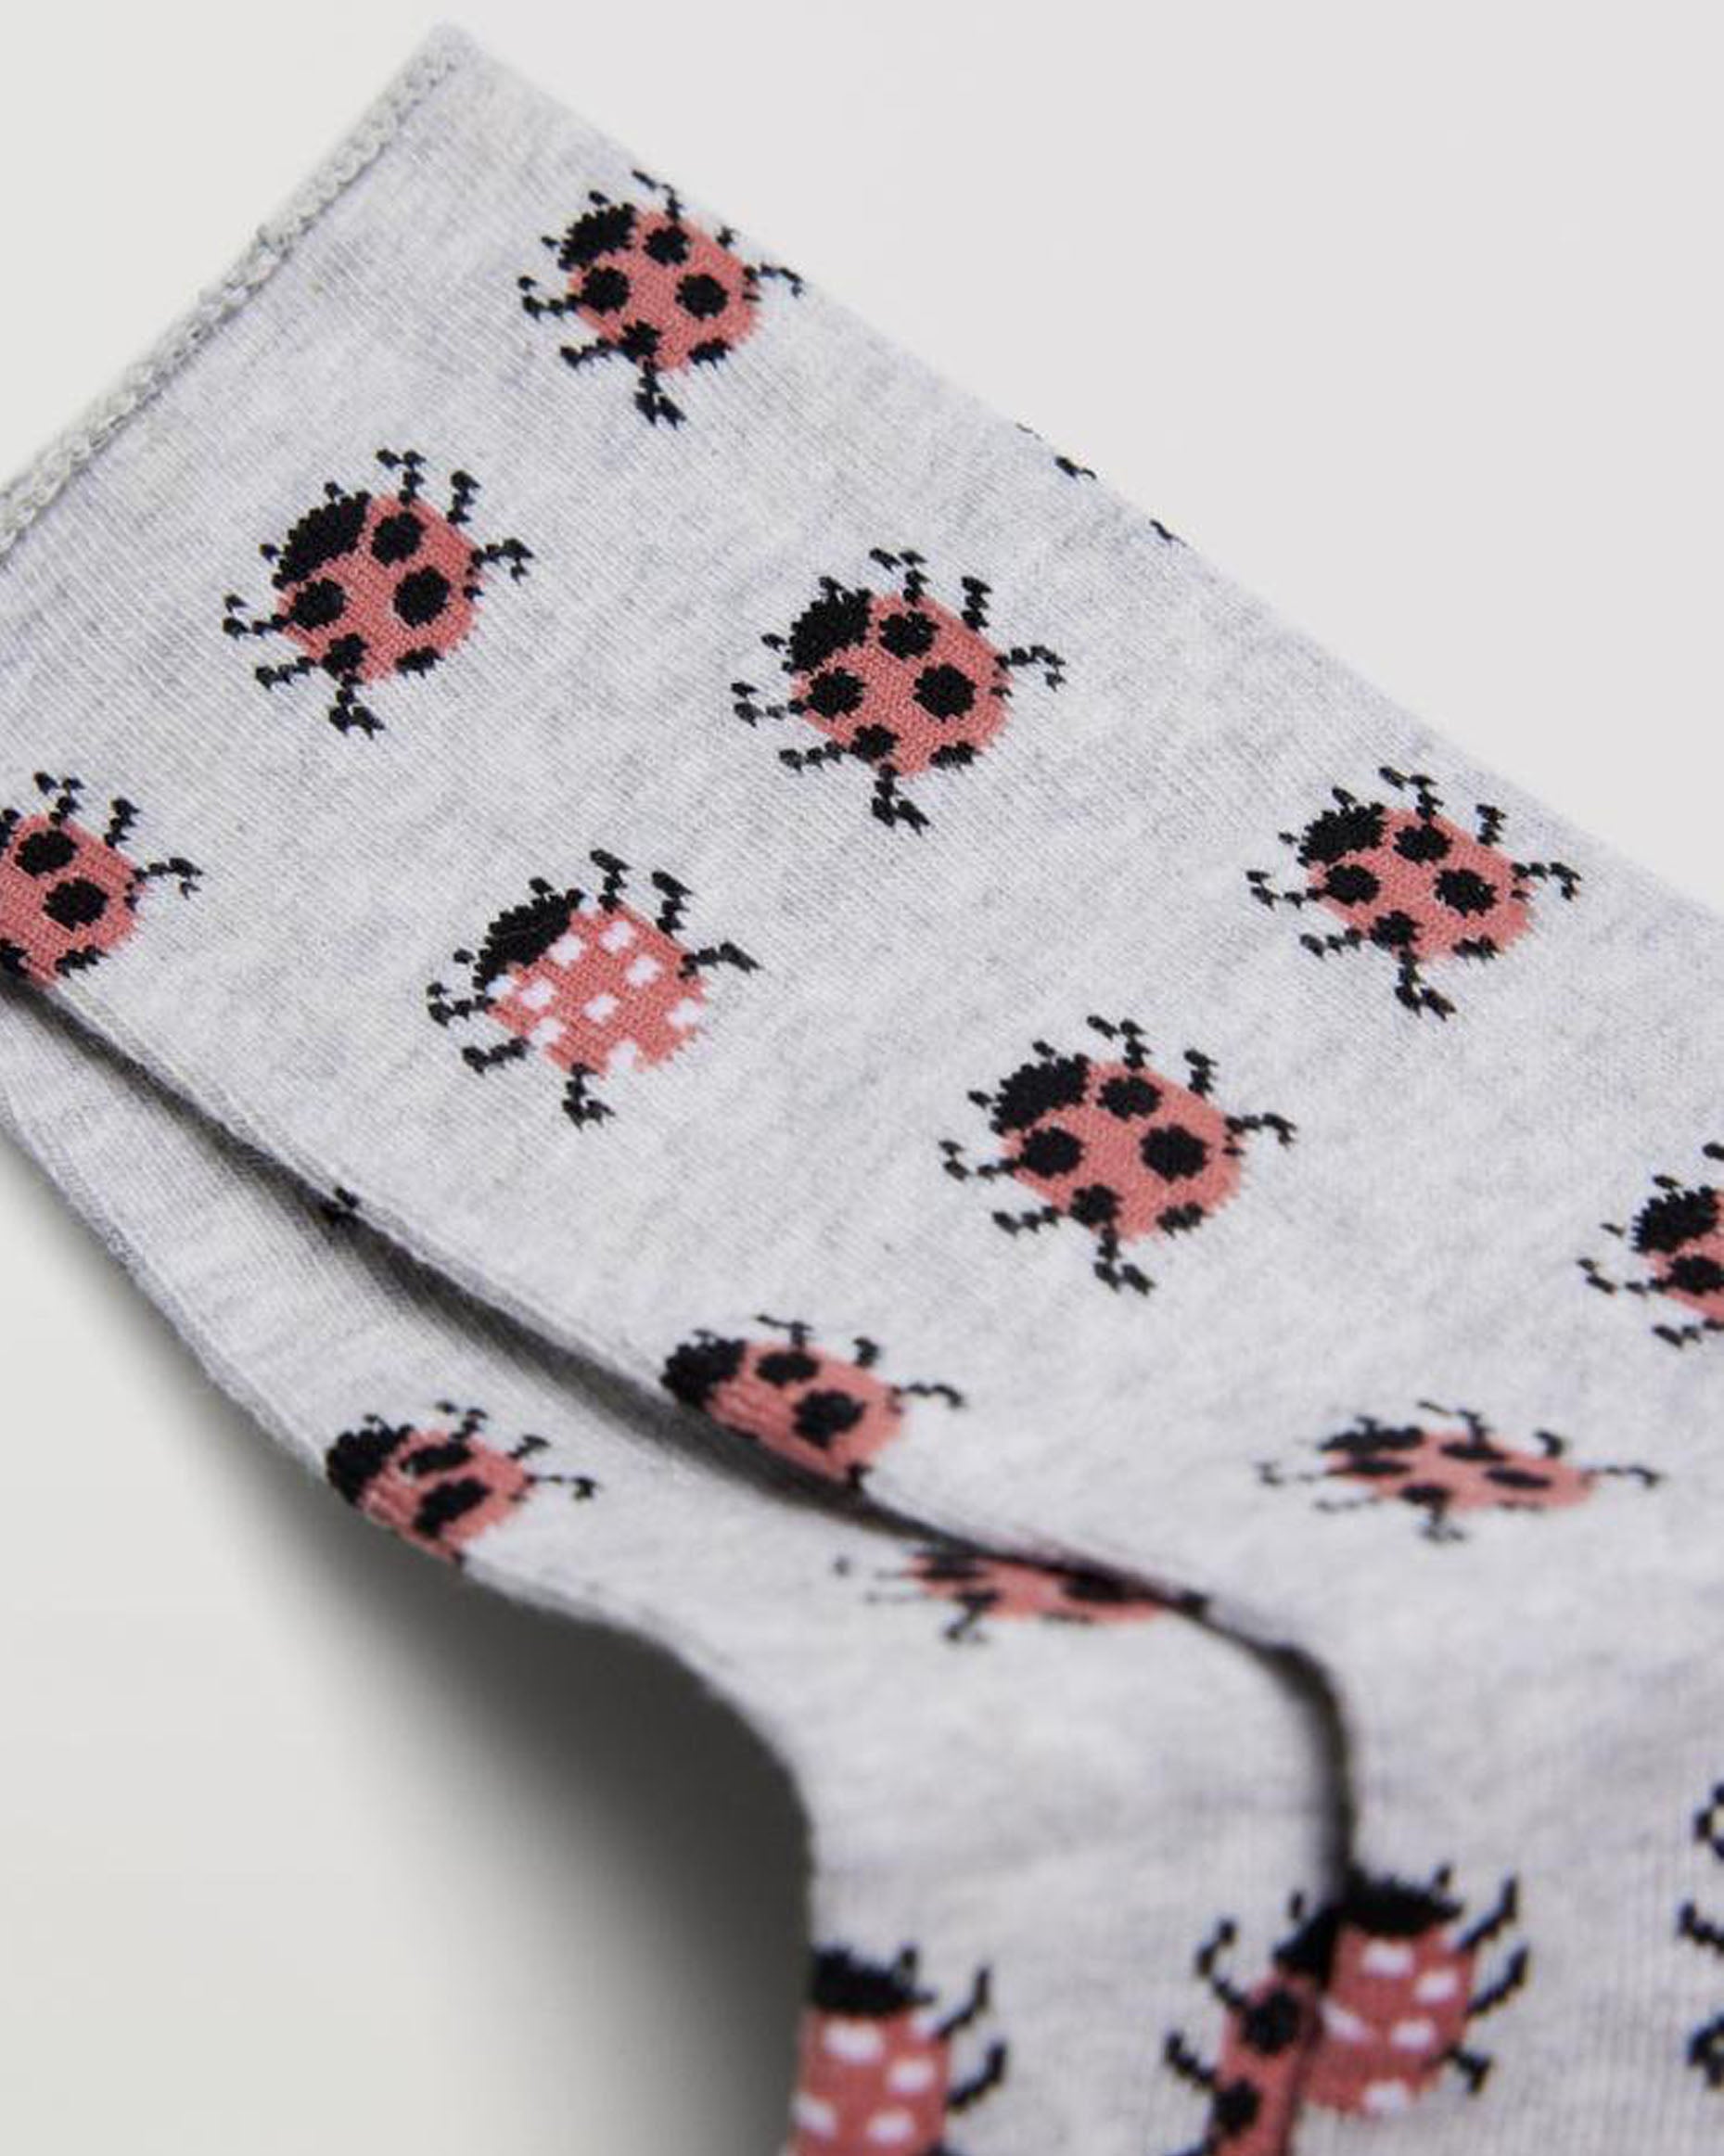 Ysabel Mora 12889 Ladybird Socks - Light grey cotton socks with an all over ladybird pattern in red and black, shaped heel, flat toe seam and no cuff edge roll.